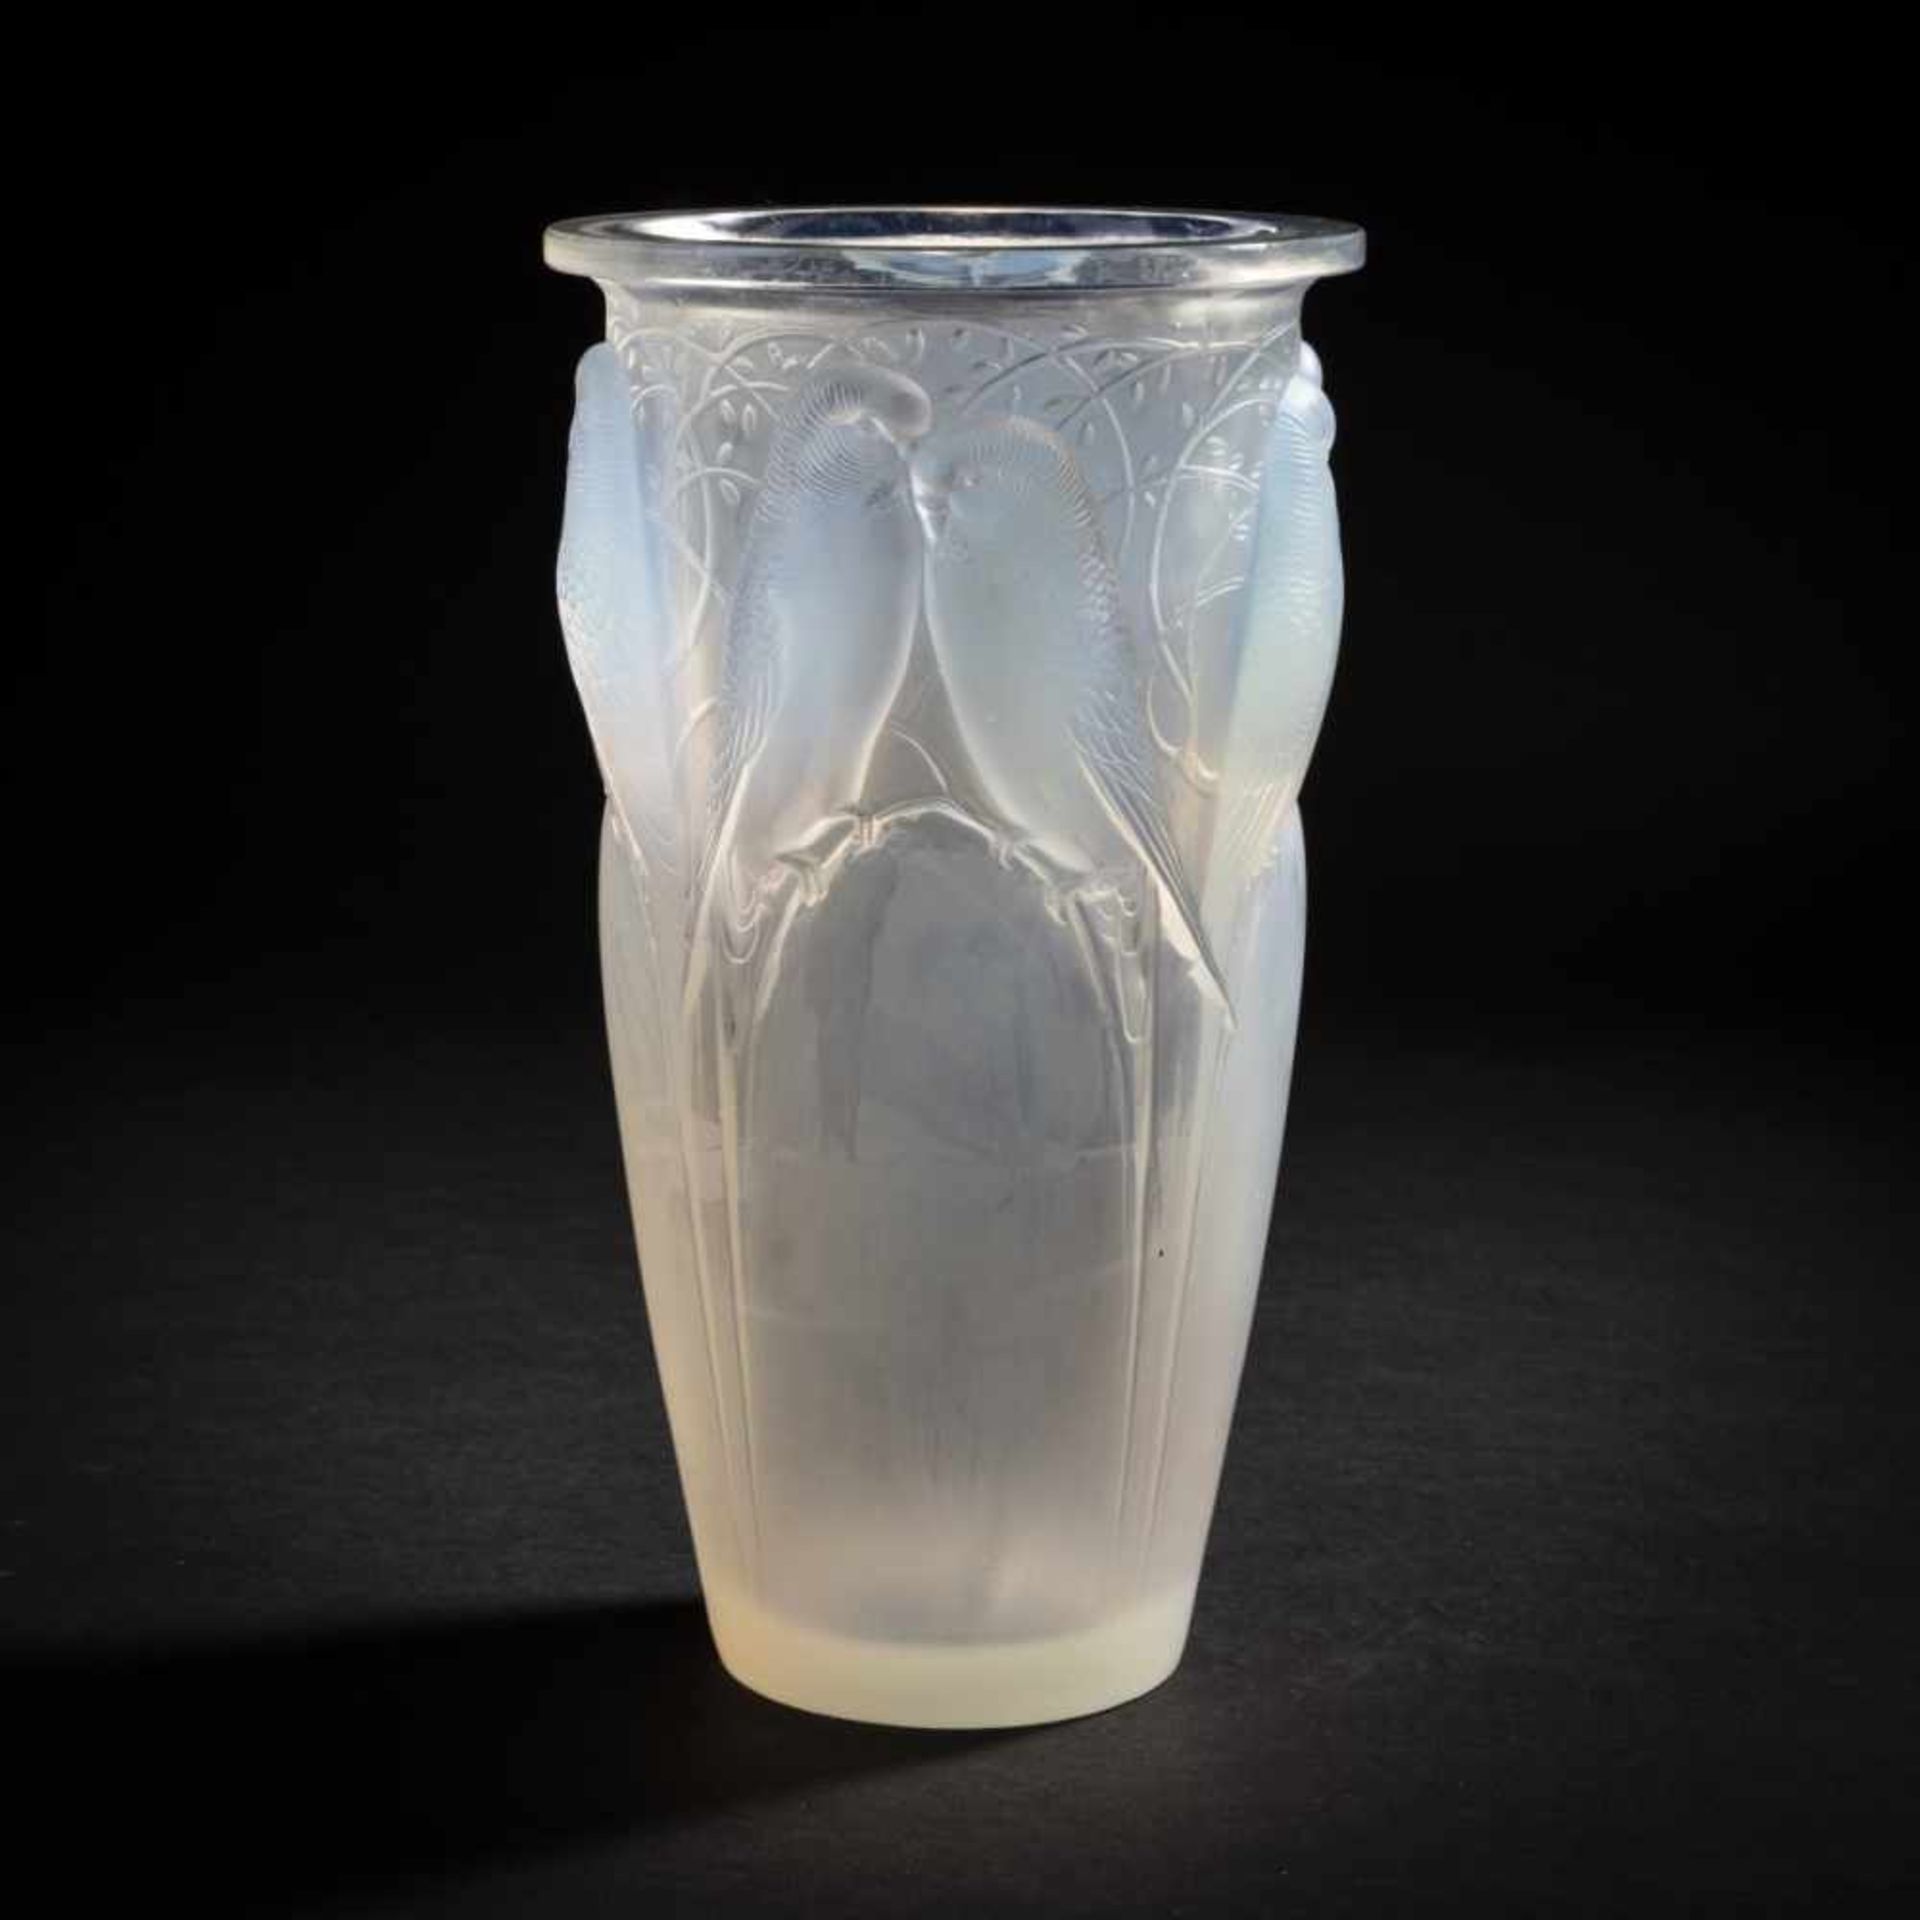 René Lalique, 'Ceylan' vase, 1924'Ceylan' vase, 1924H. 24.3 cm. Clear, moulded glass, satined and